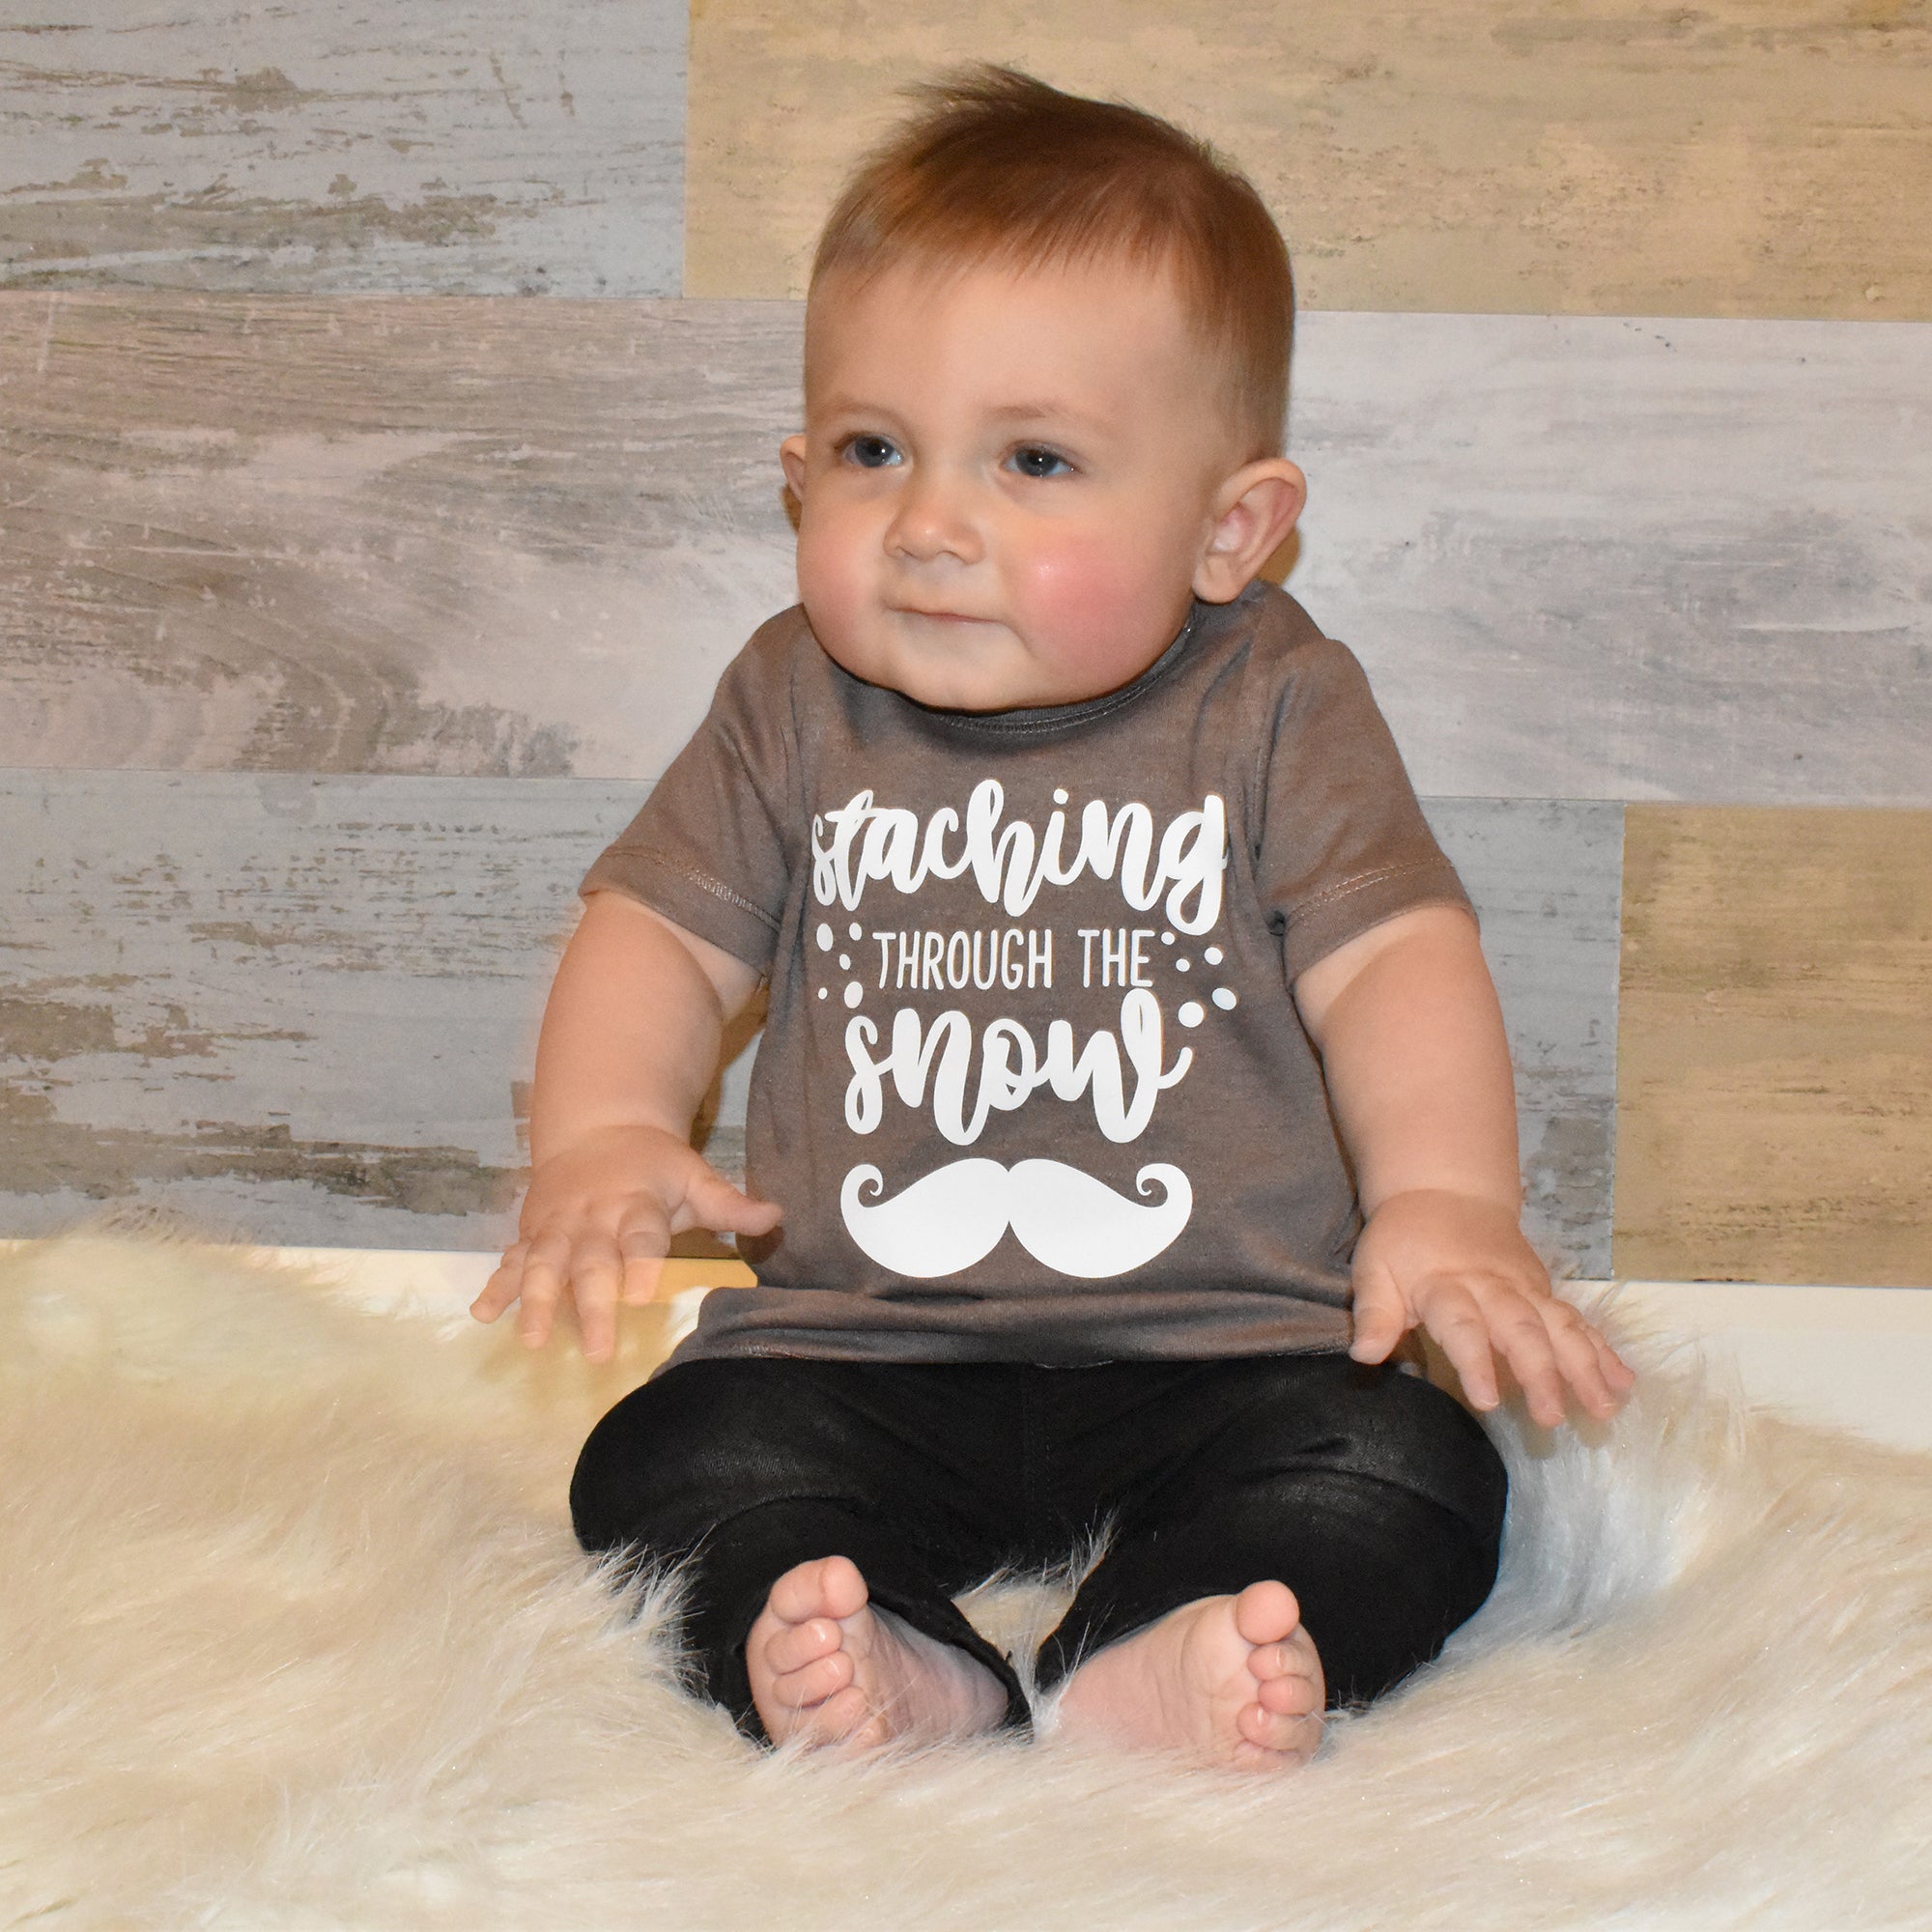 Toddler boy wearing mocha shirt, with 'Staching through the snow' print by KMLeon.